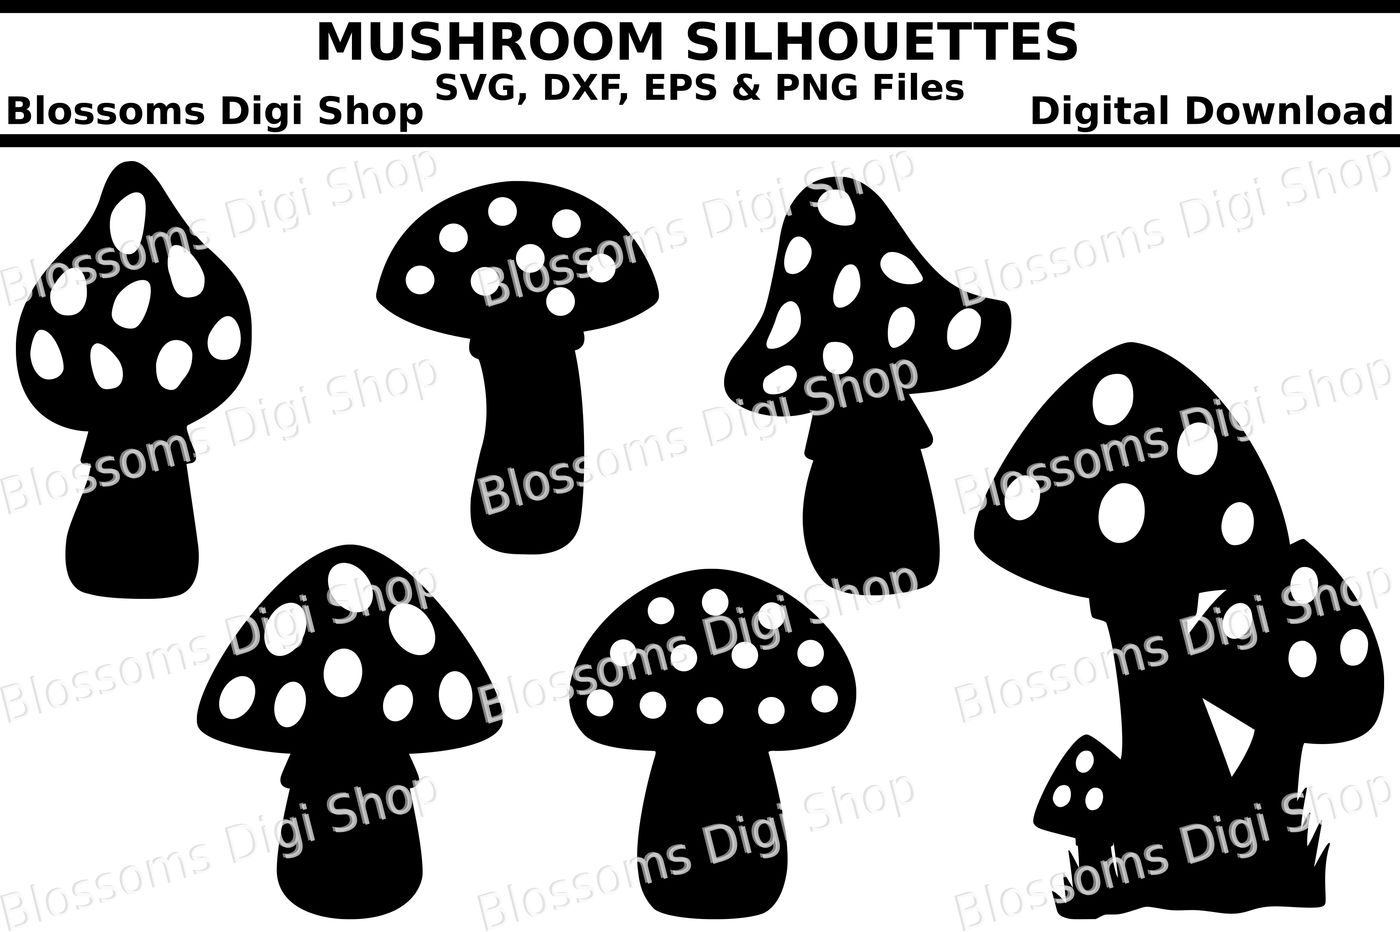 Mushroom Silhouettes Svg Dxf Eps And Png Cut Files By Blossoms Digi Shop Thehungryjpeg Com